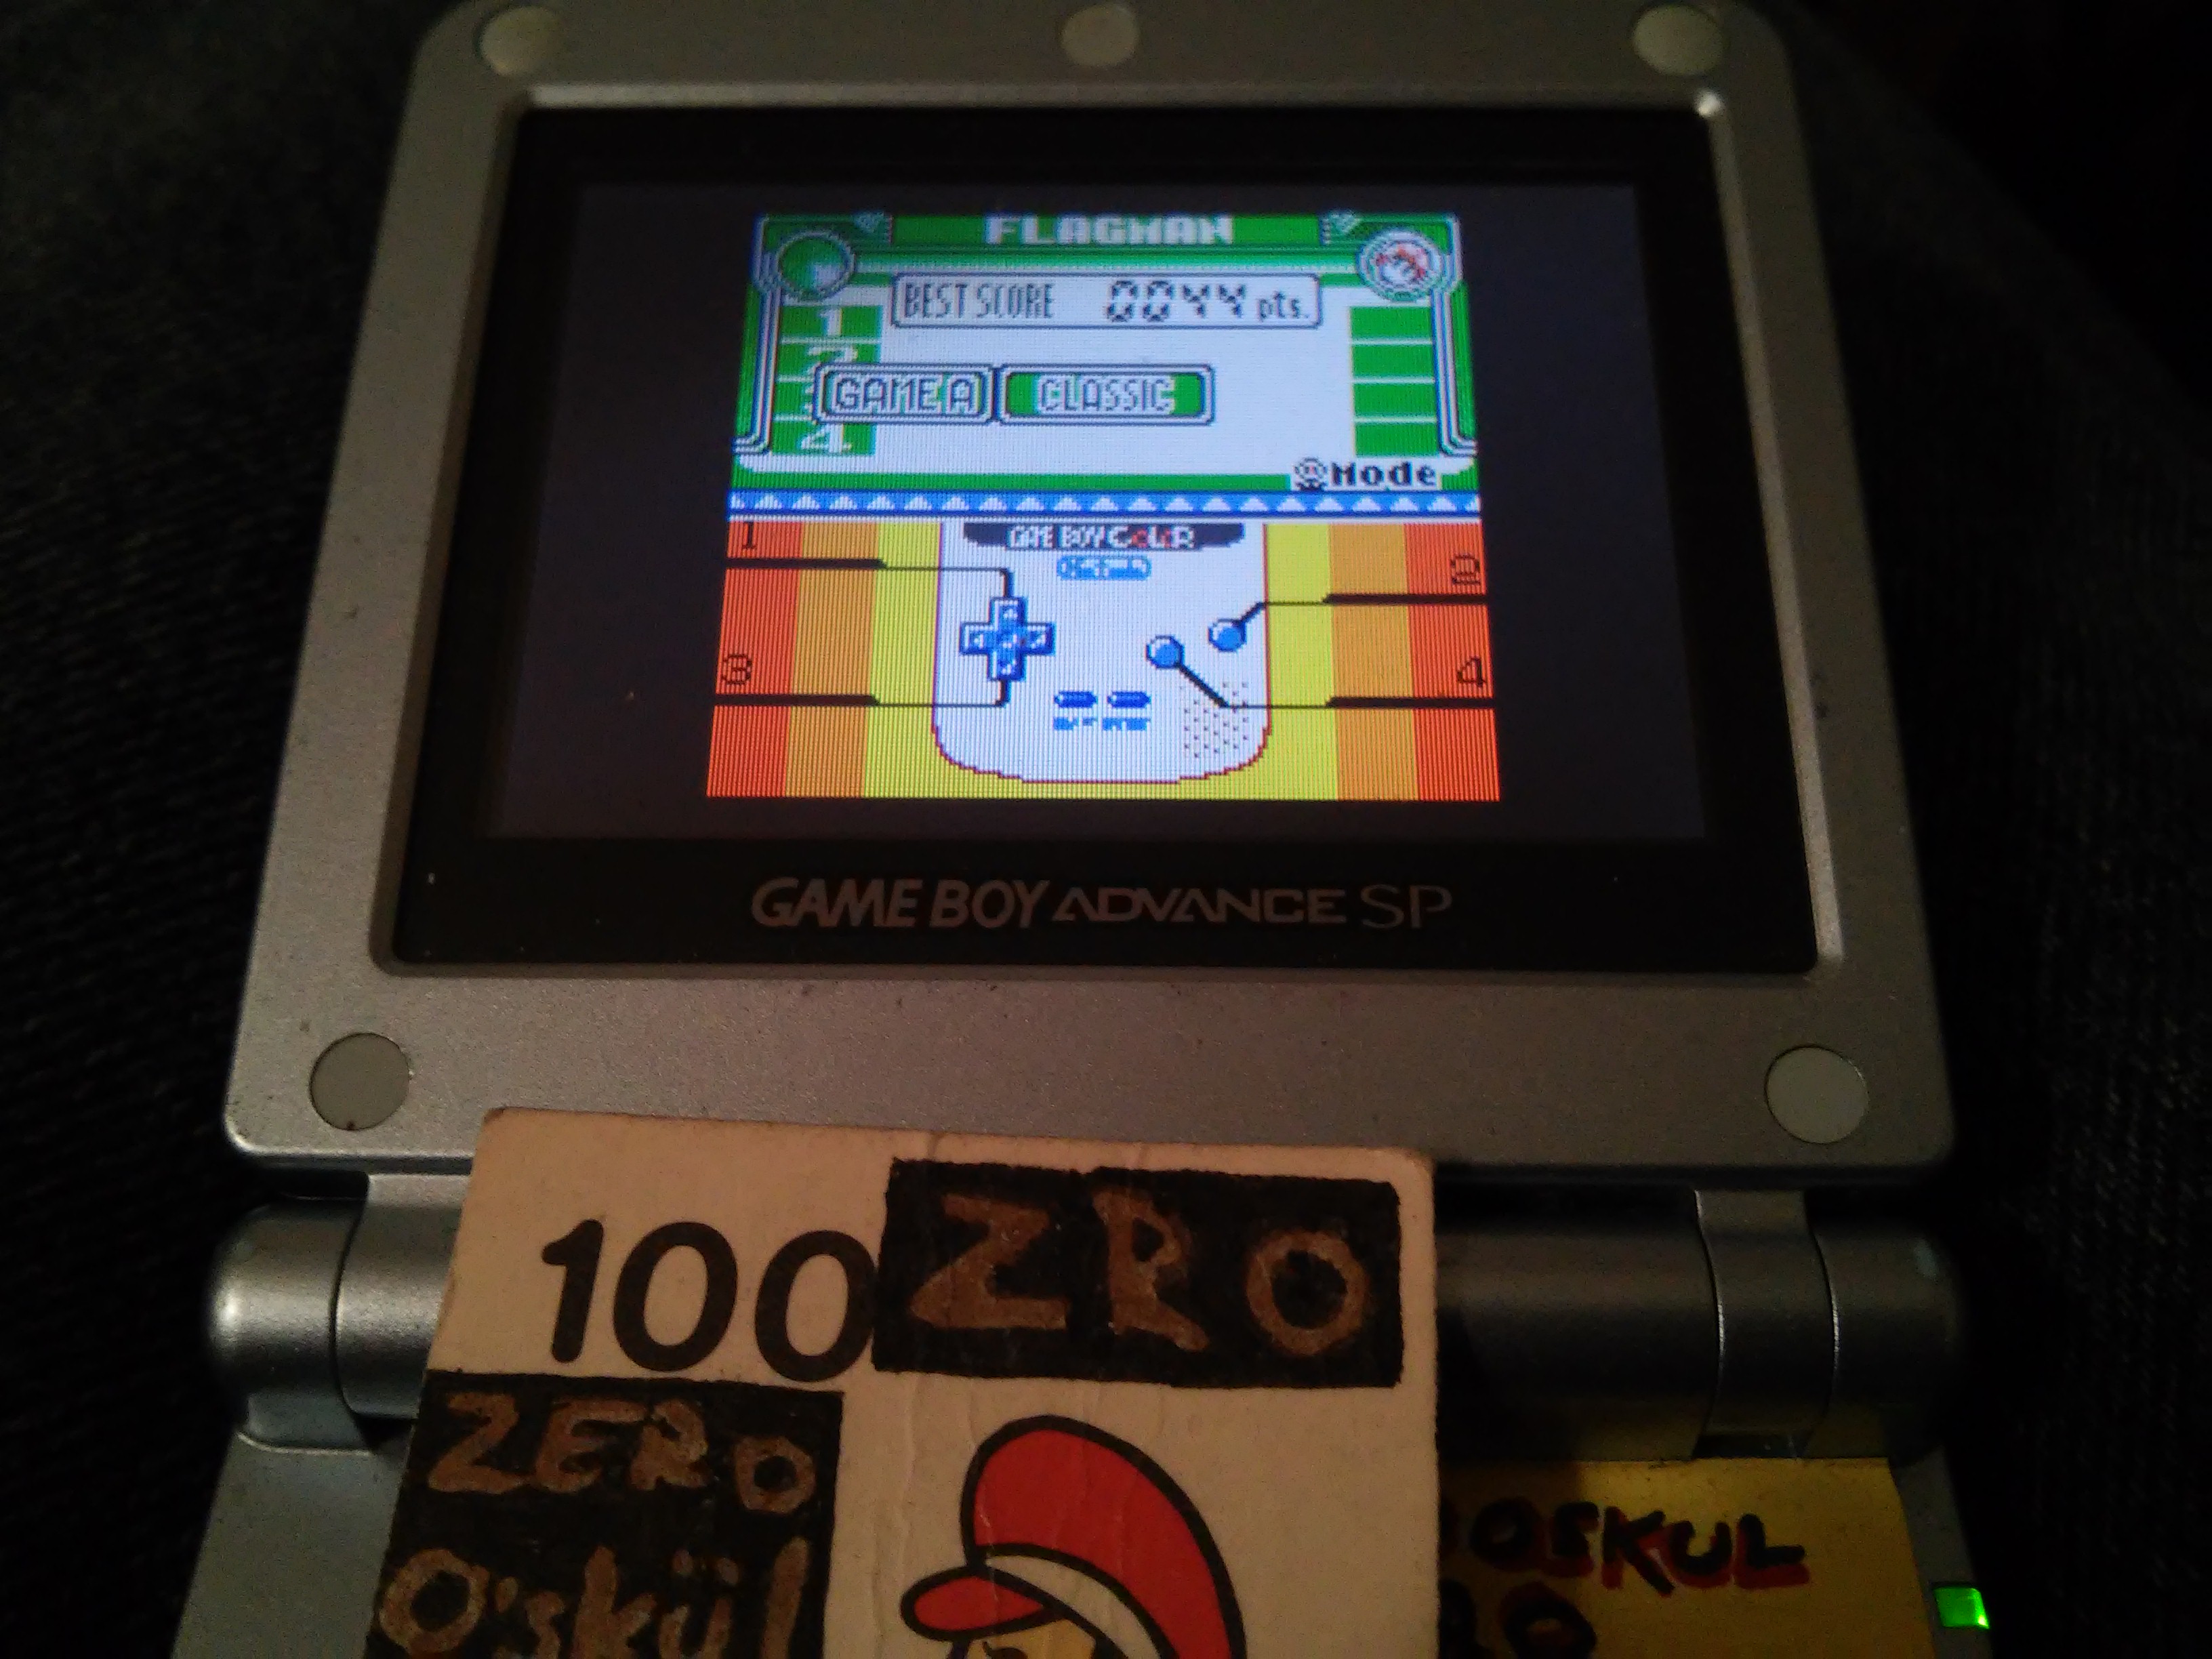 zerooskul: Game & Watch Gallery 3: Flagman [Classic: Game A] (Game Boy Color) 44 points on 2019-03-11 03:15:20